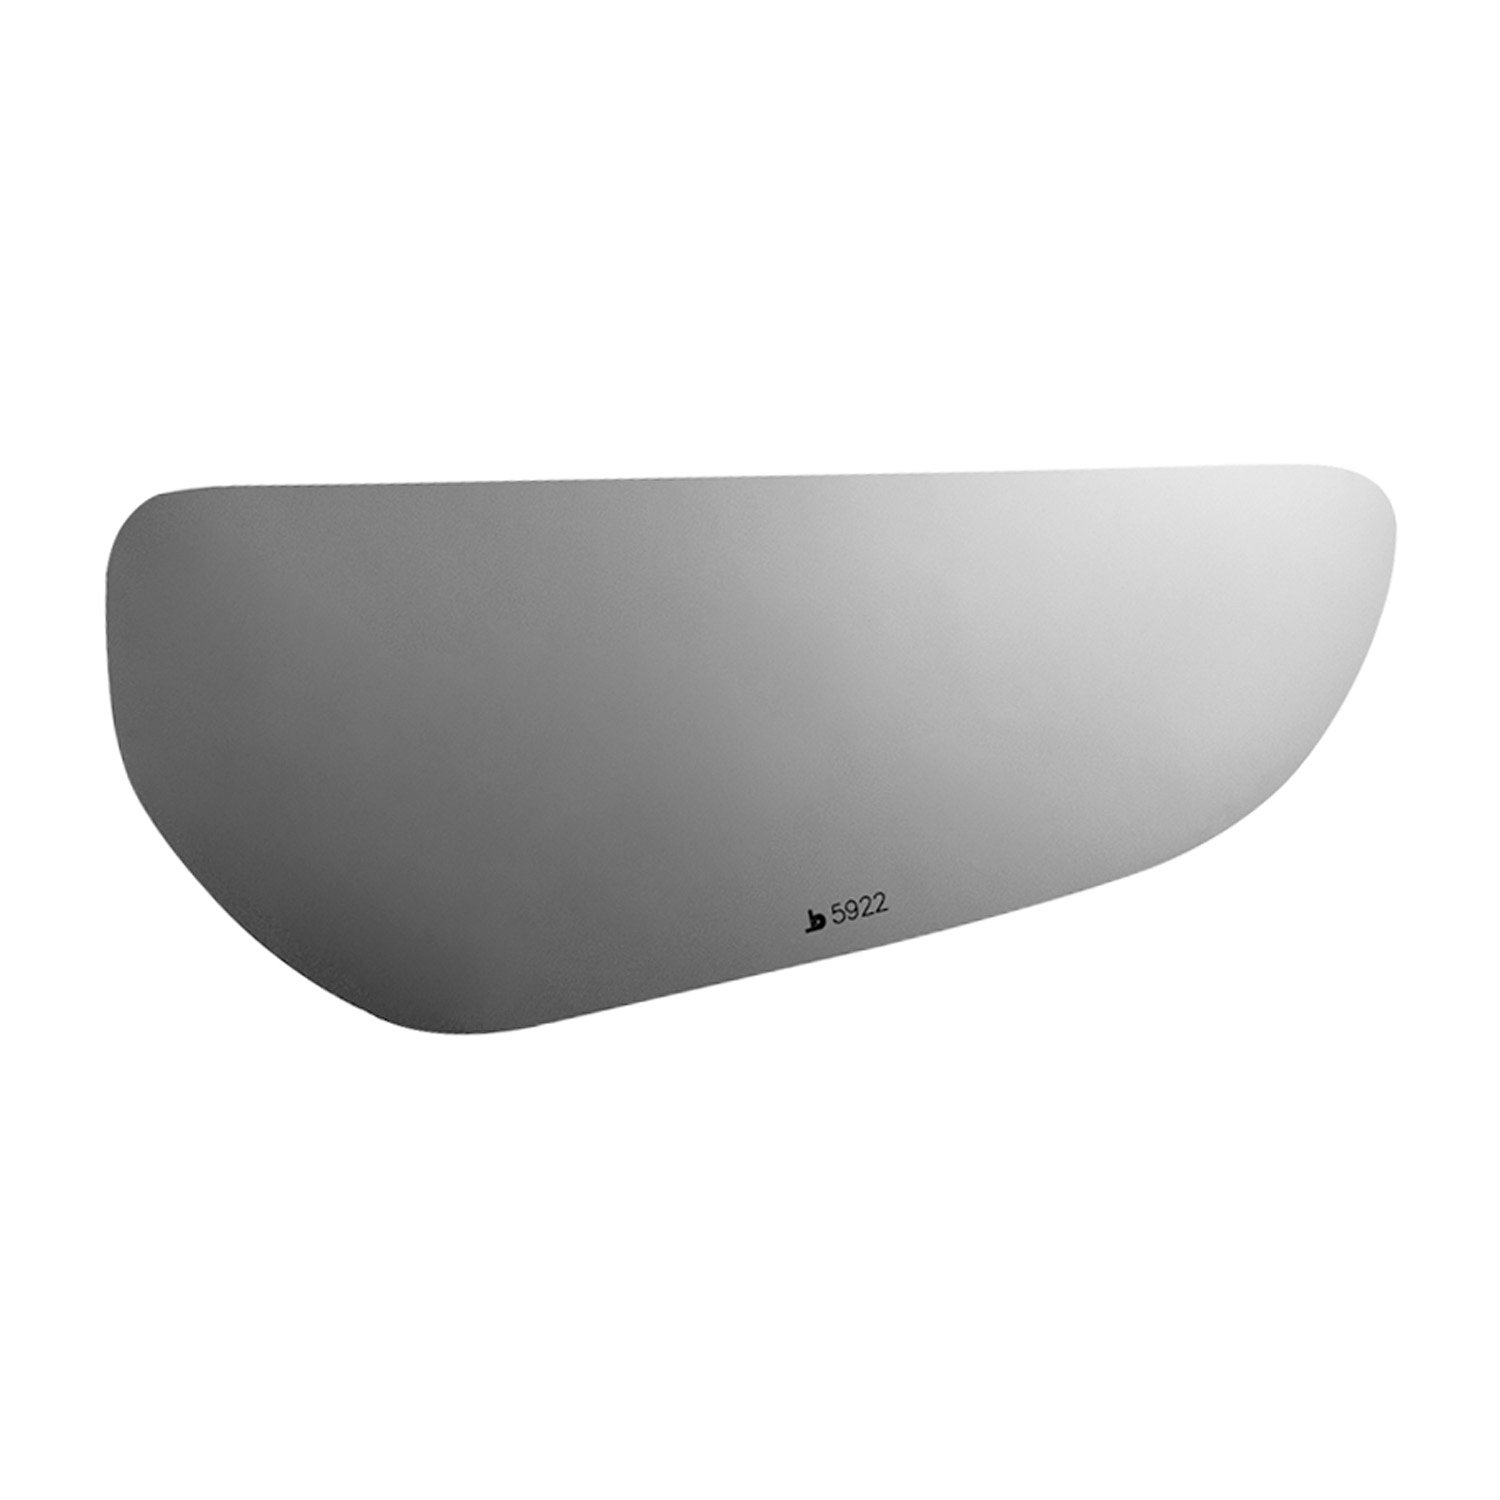 5922 SIDE VIEW MIRROR